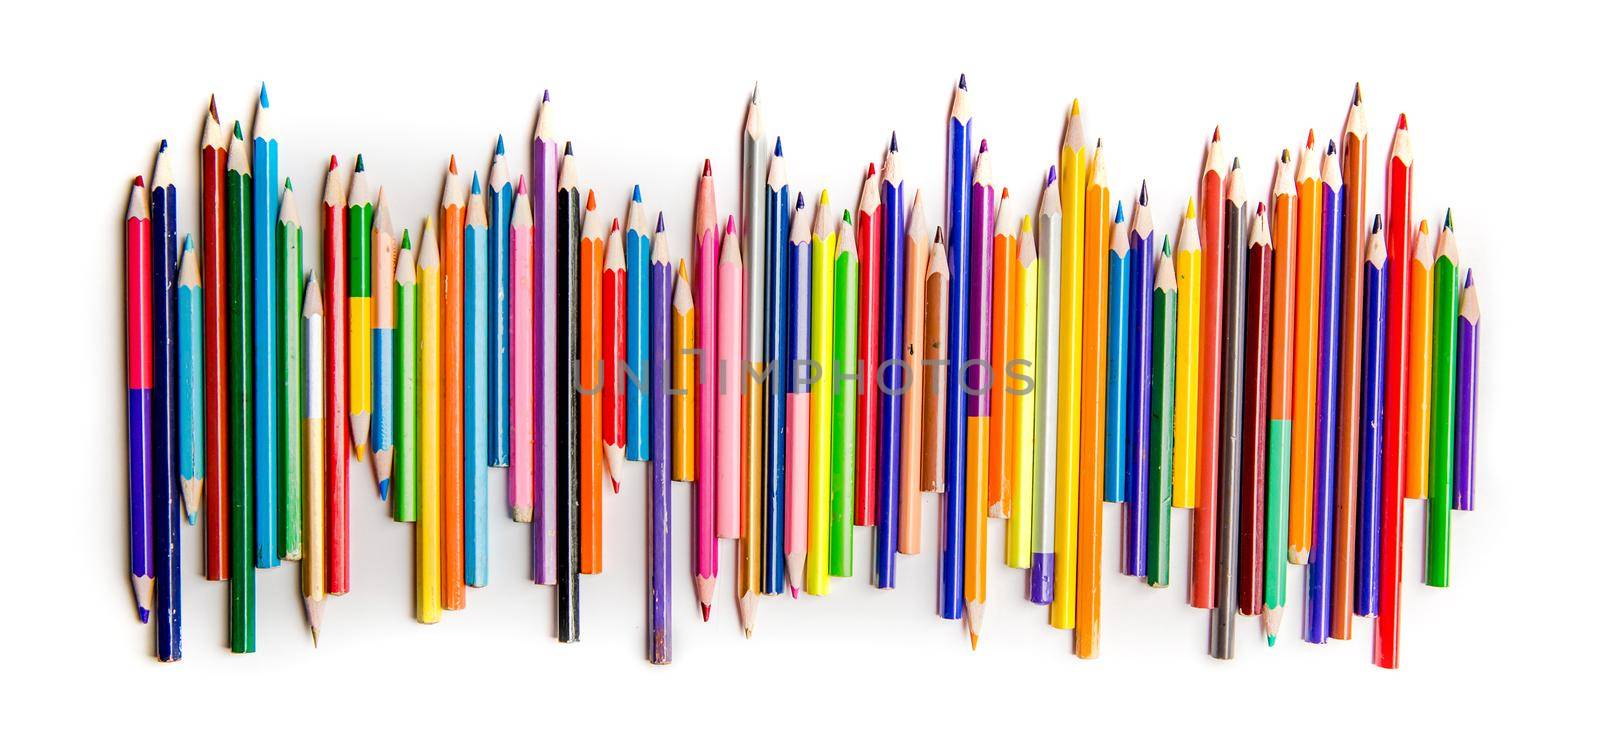 Bright color pencils in a row by tan4ikk1